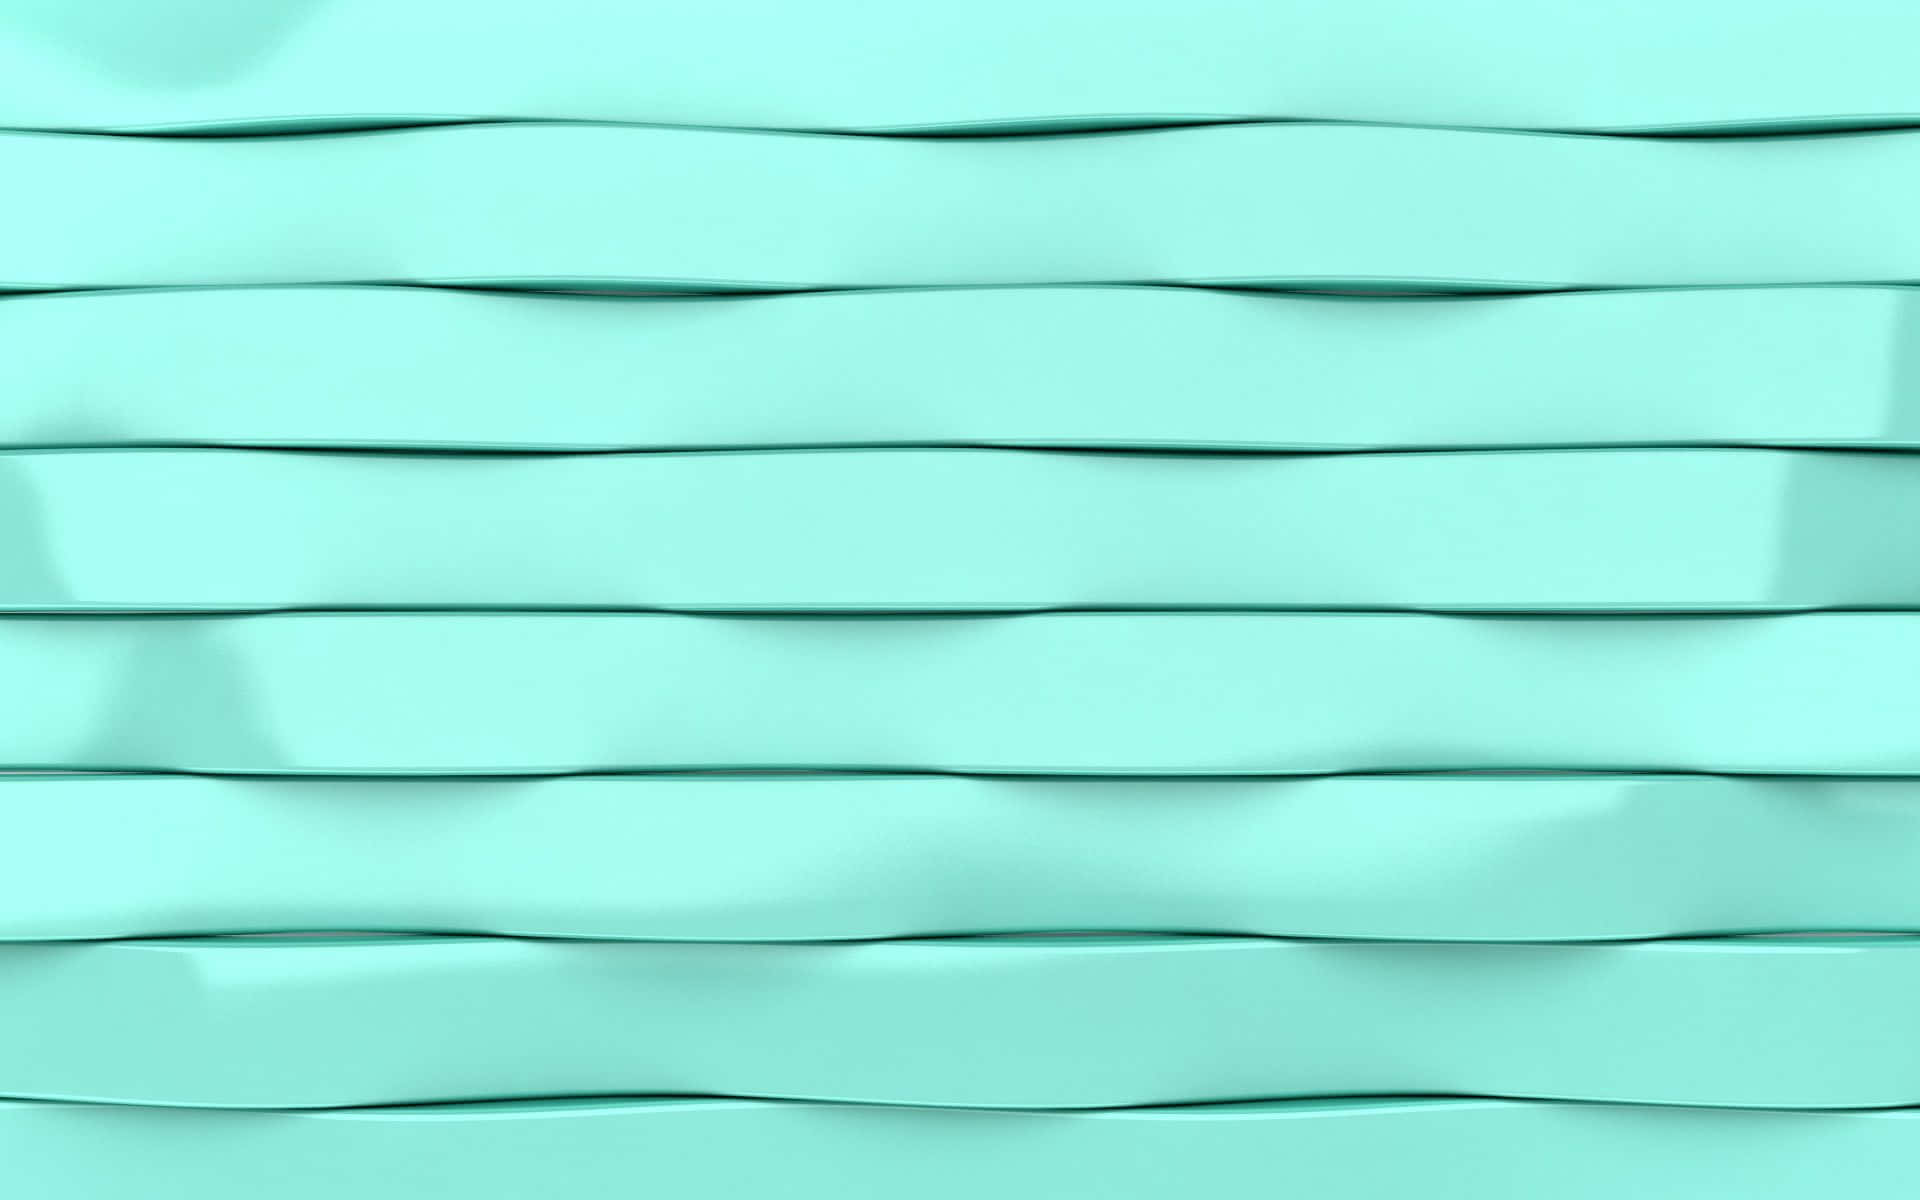 solid teal background tumblr